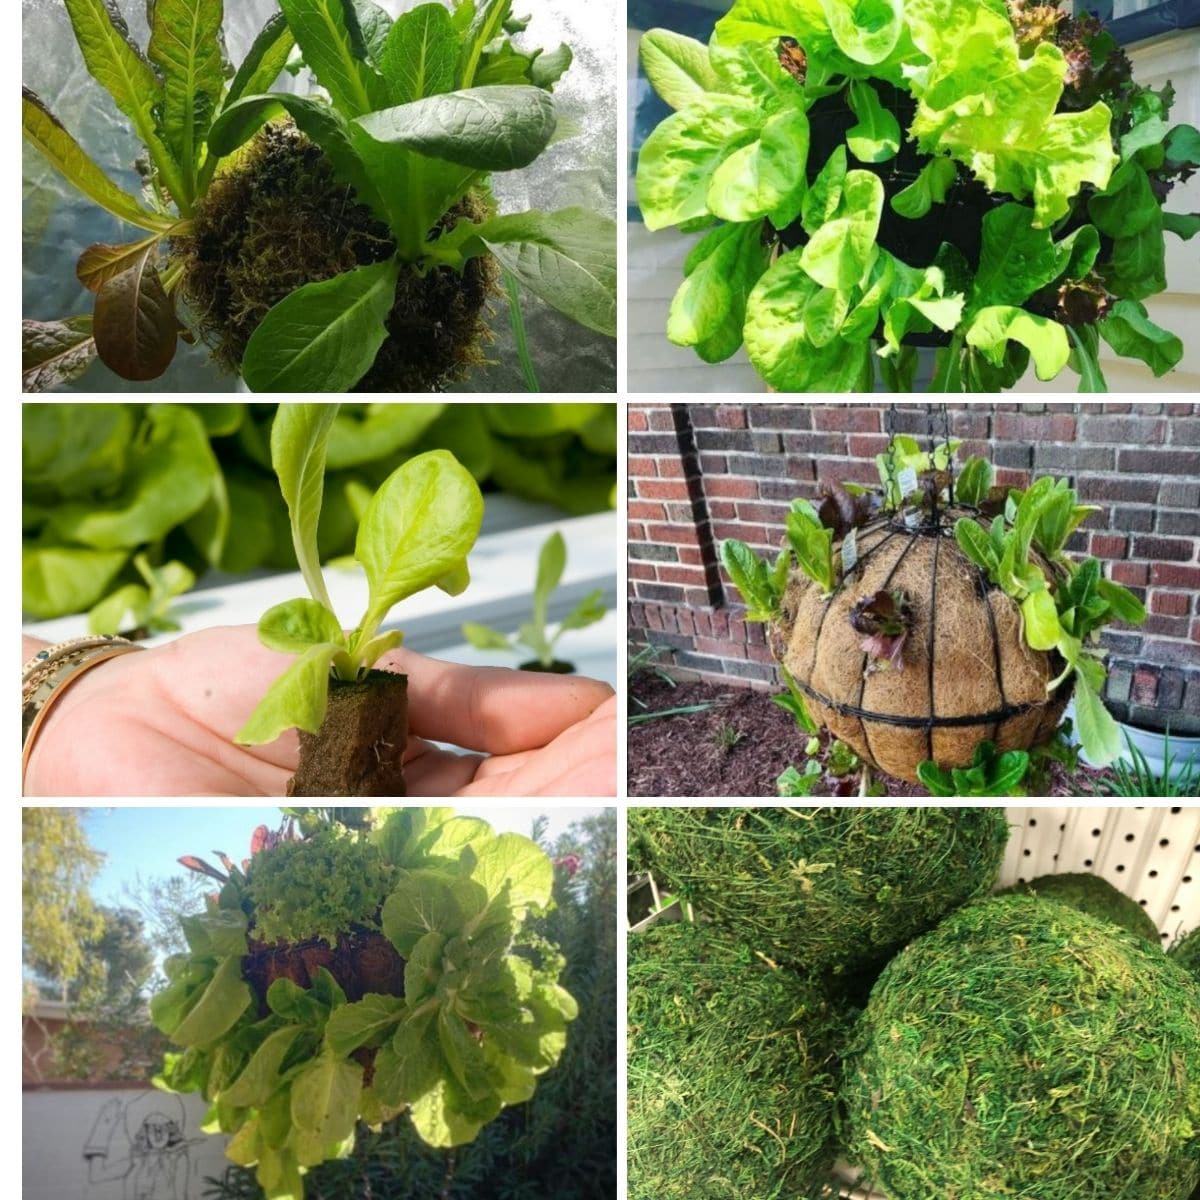 Lettuce globe planter demonstrations in a collage photo.